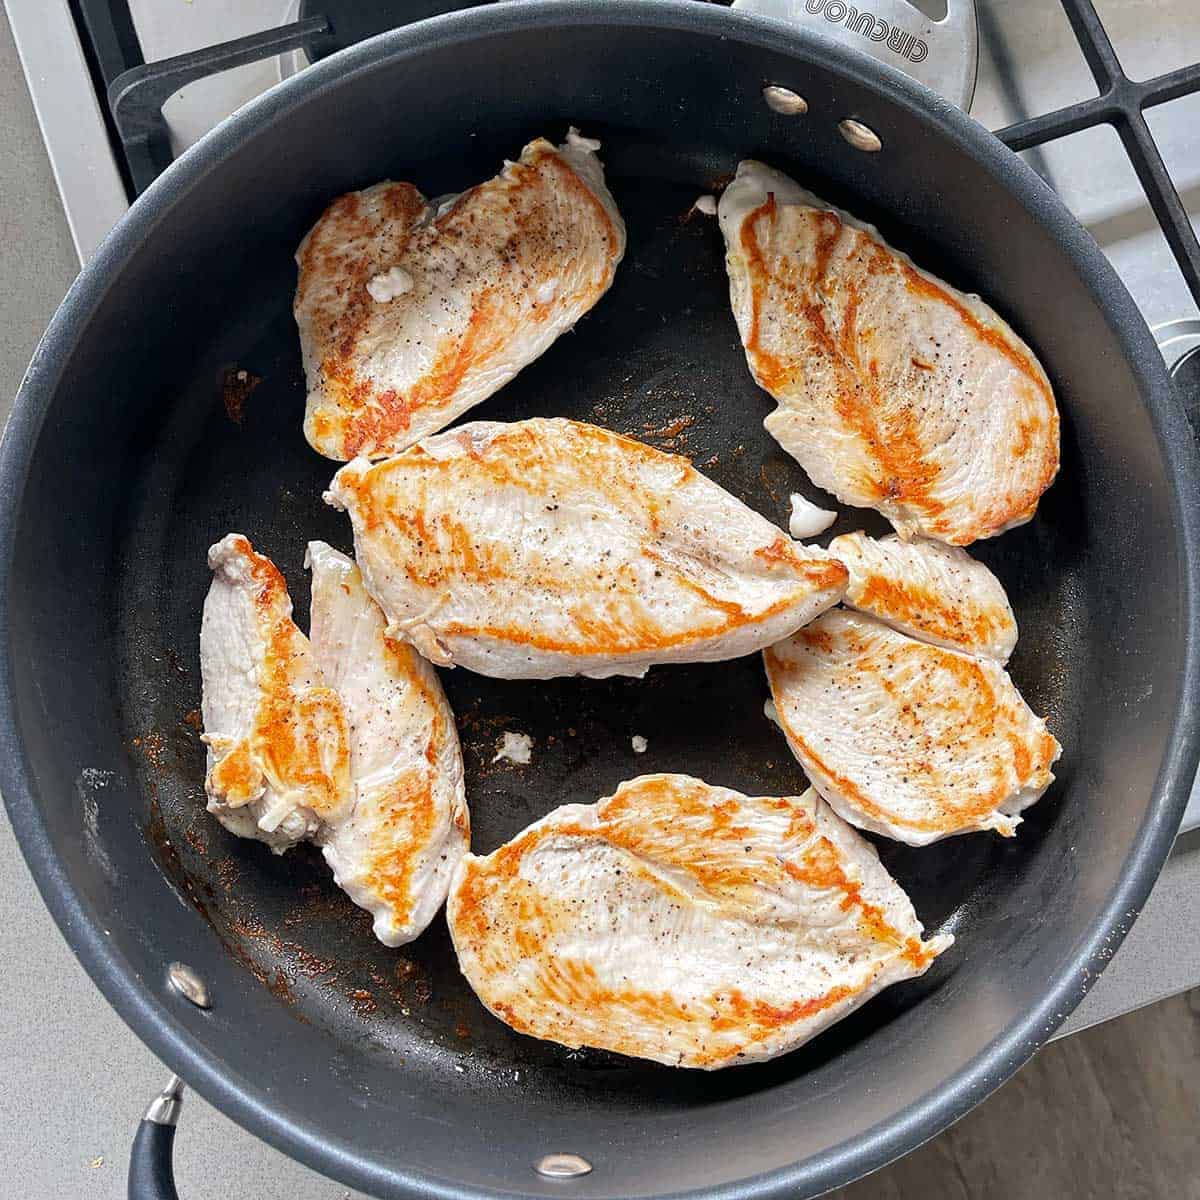 Chicken breasts cooking in a large pan.